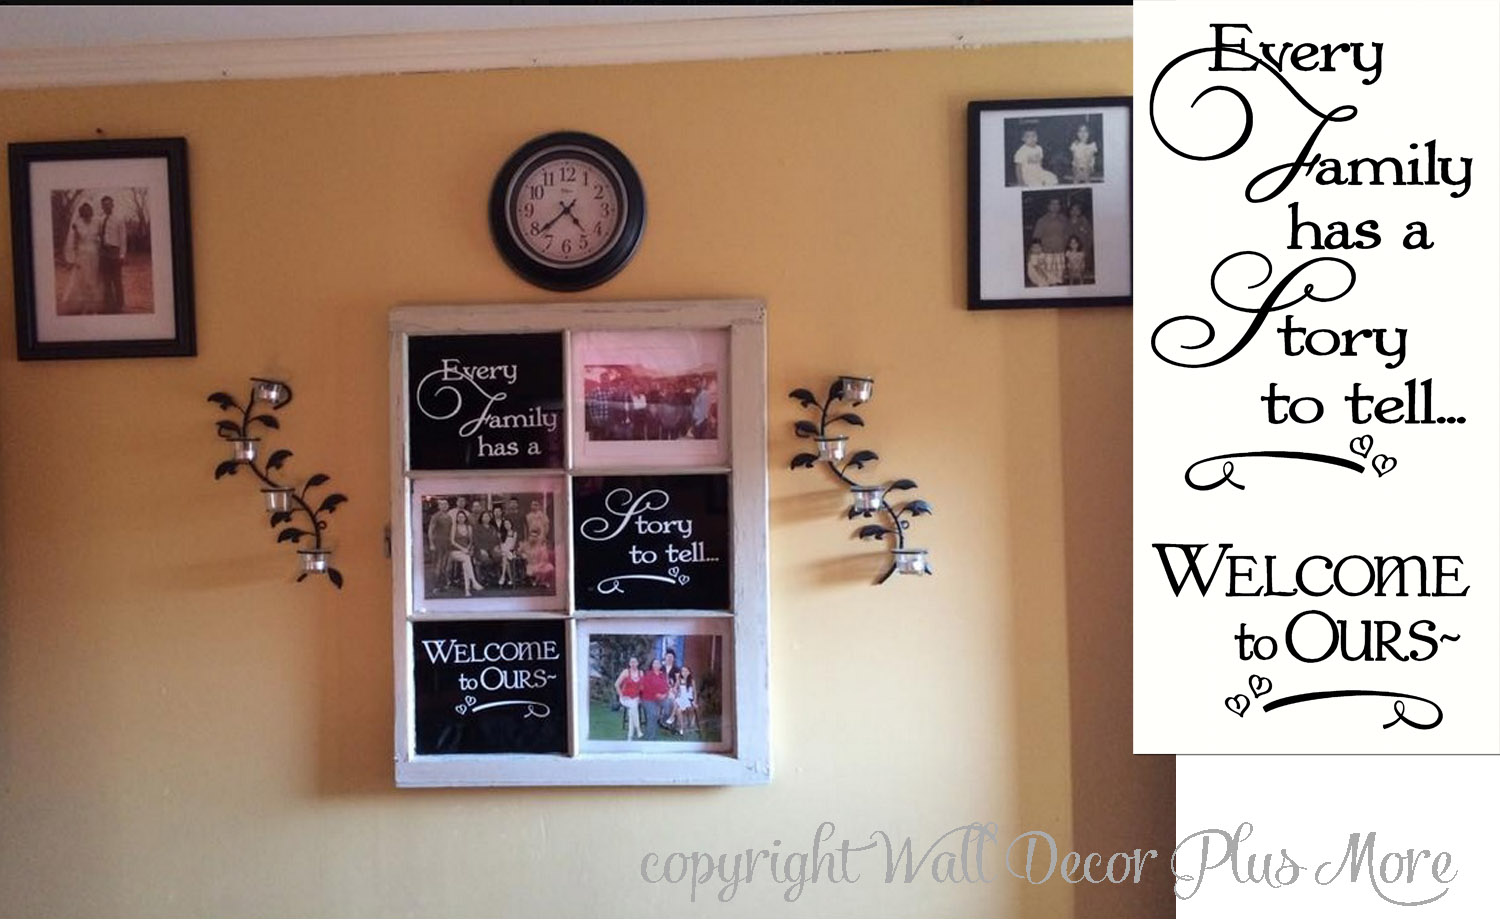 Every Family Wall Decal decorating an old window